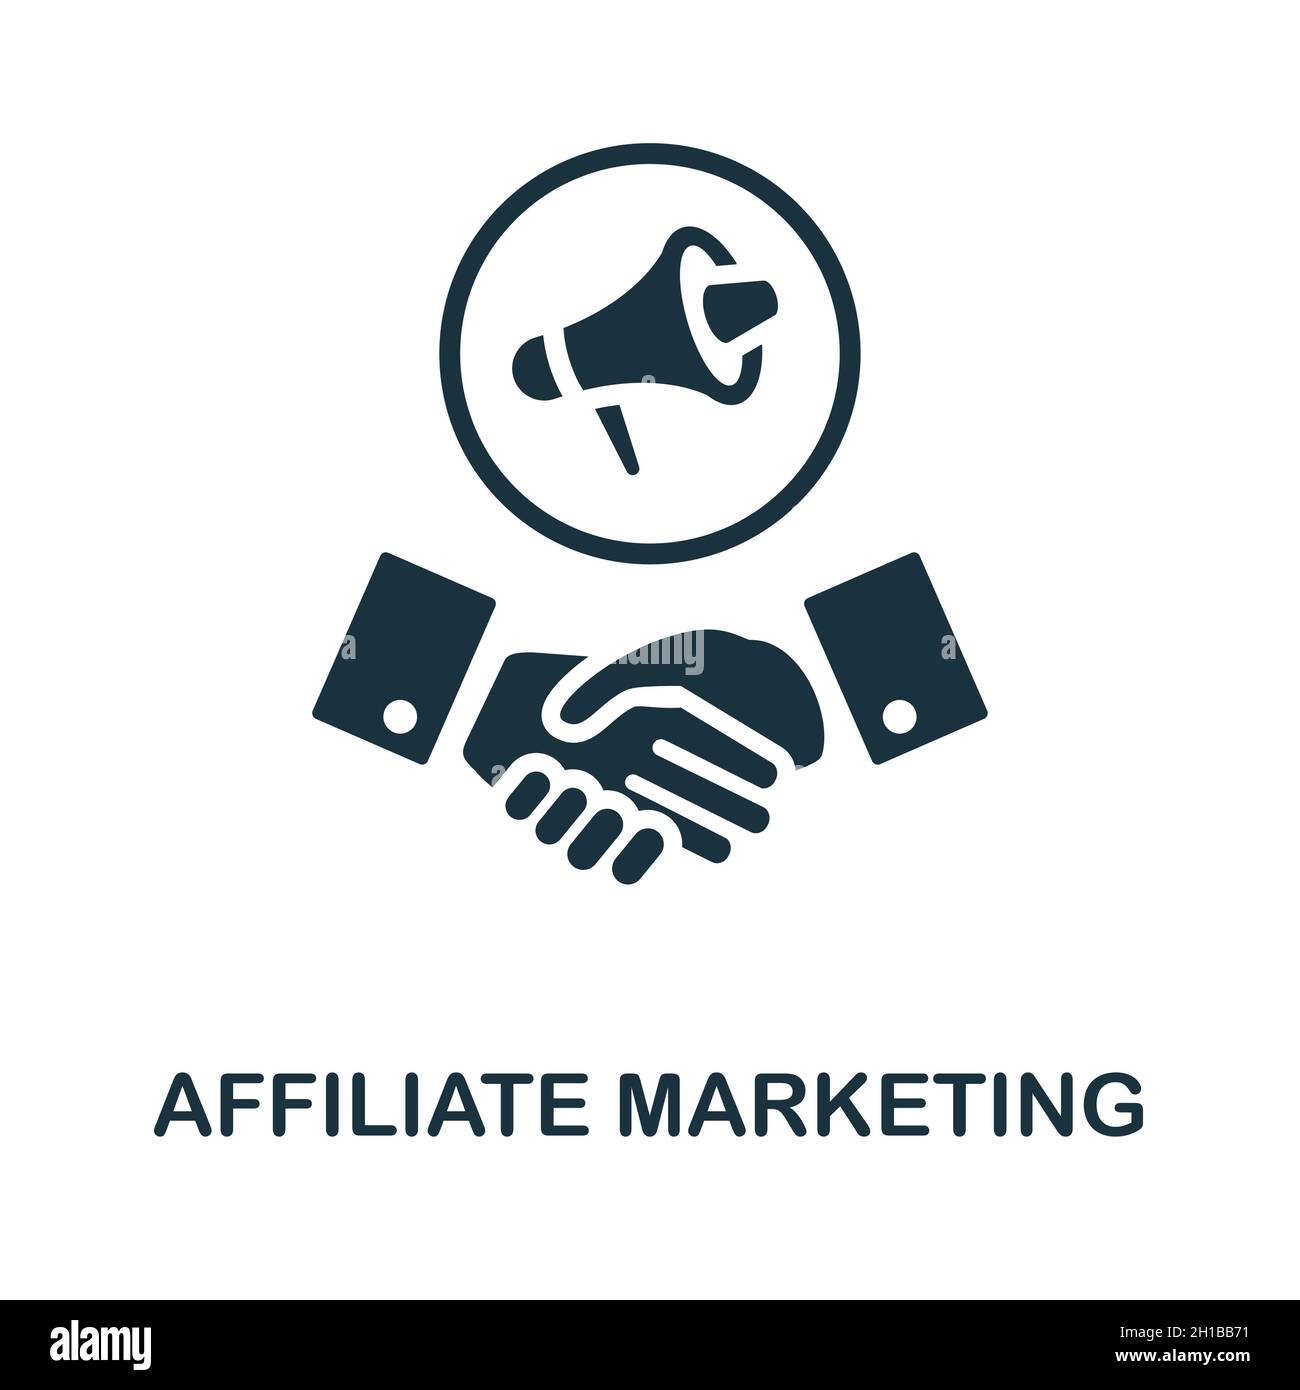 affiliate-marketing-icon-monochrome-sign-from-affiliate-marketing-collection-creative-affiliate-marketing-icon-illustration-for-web-design-2H1BB71